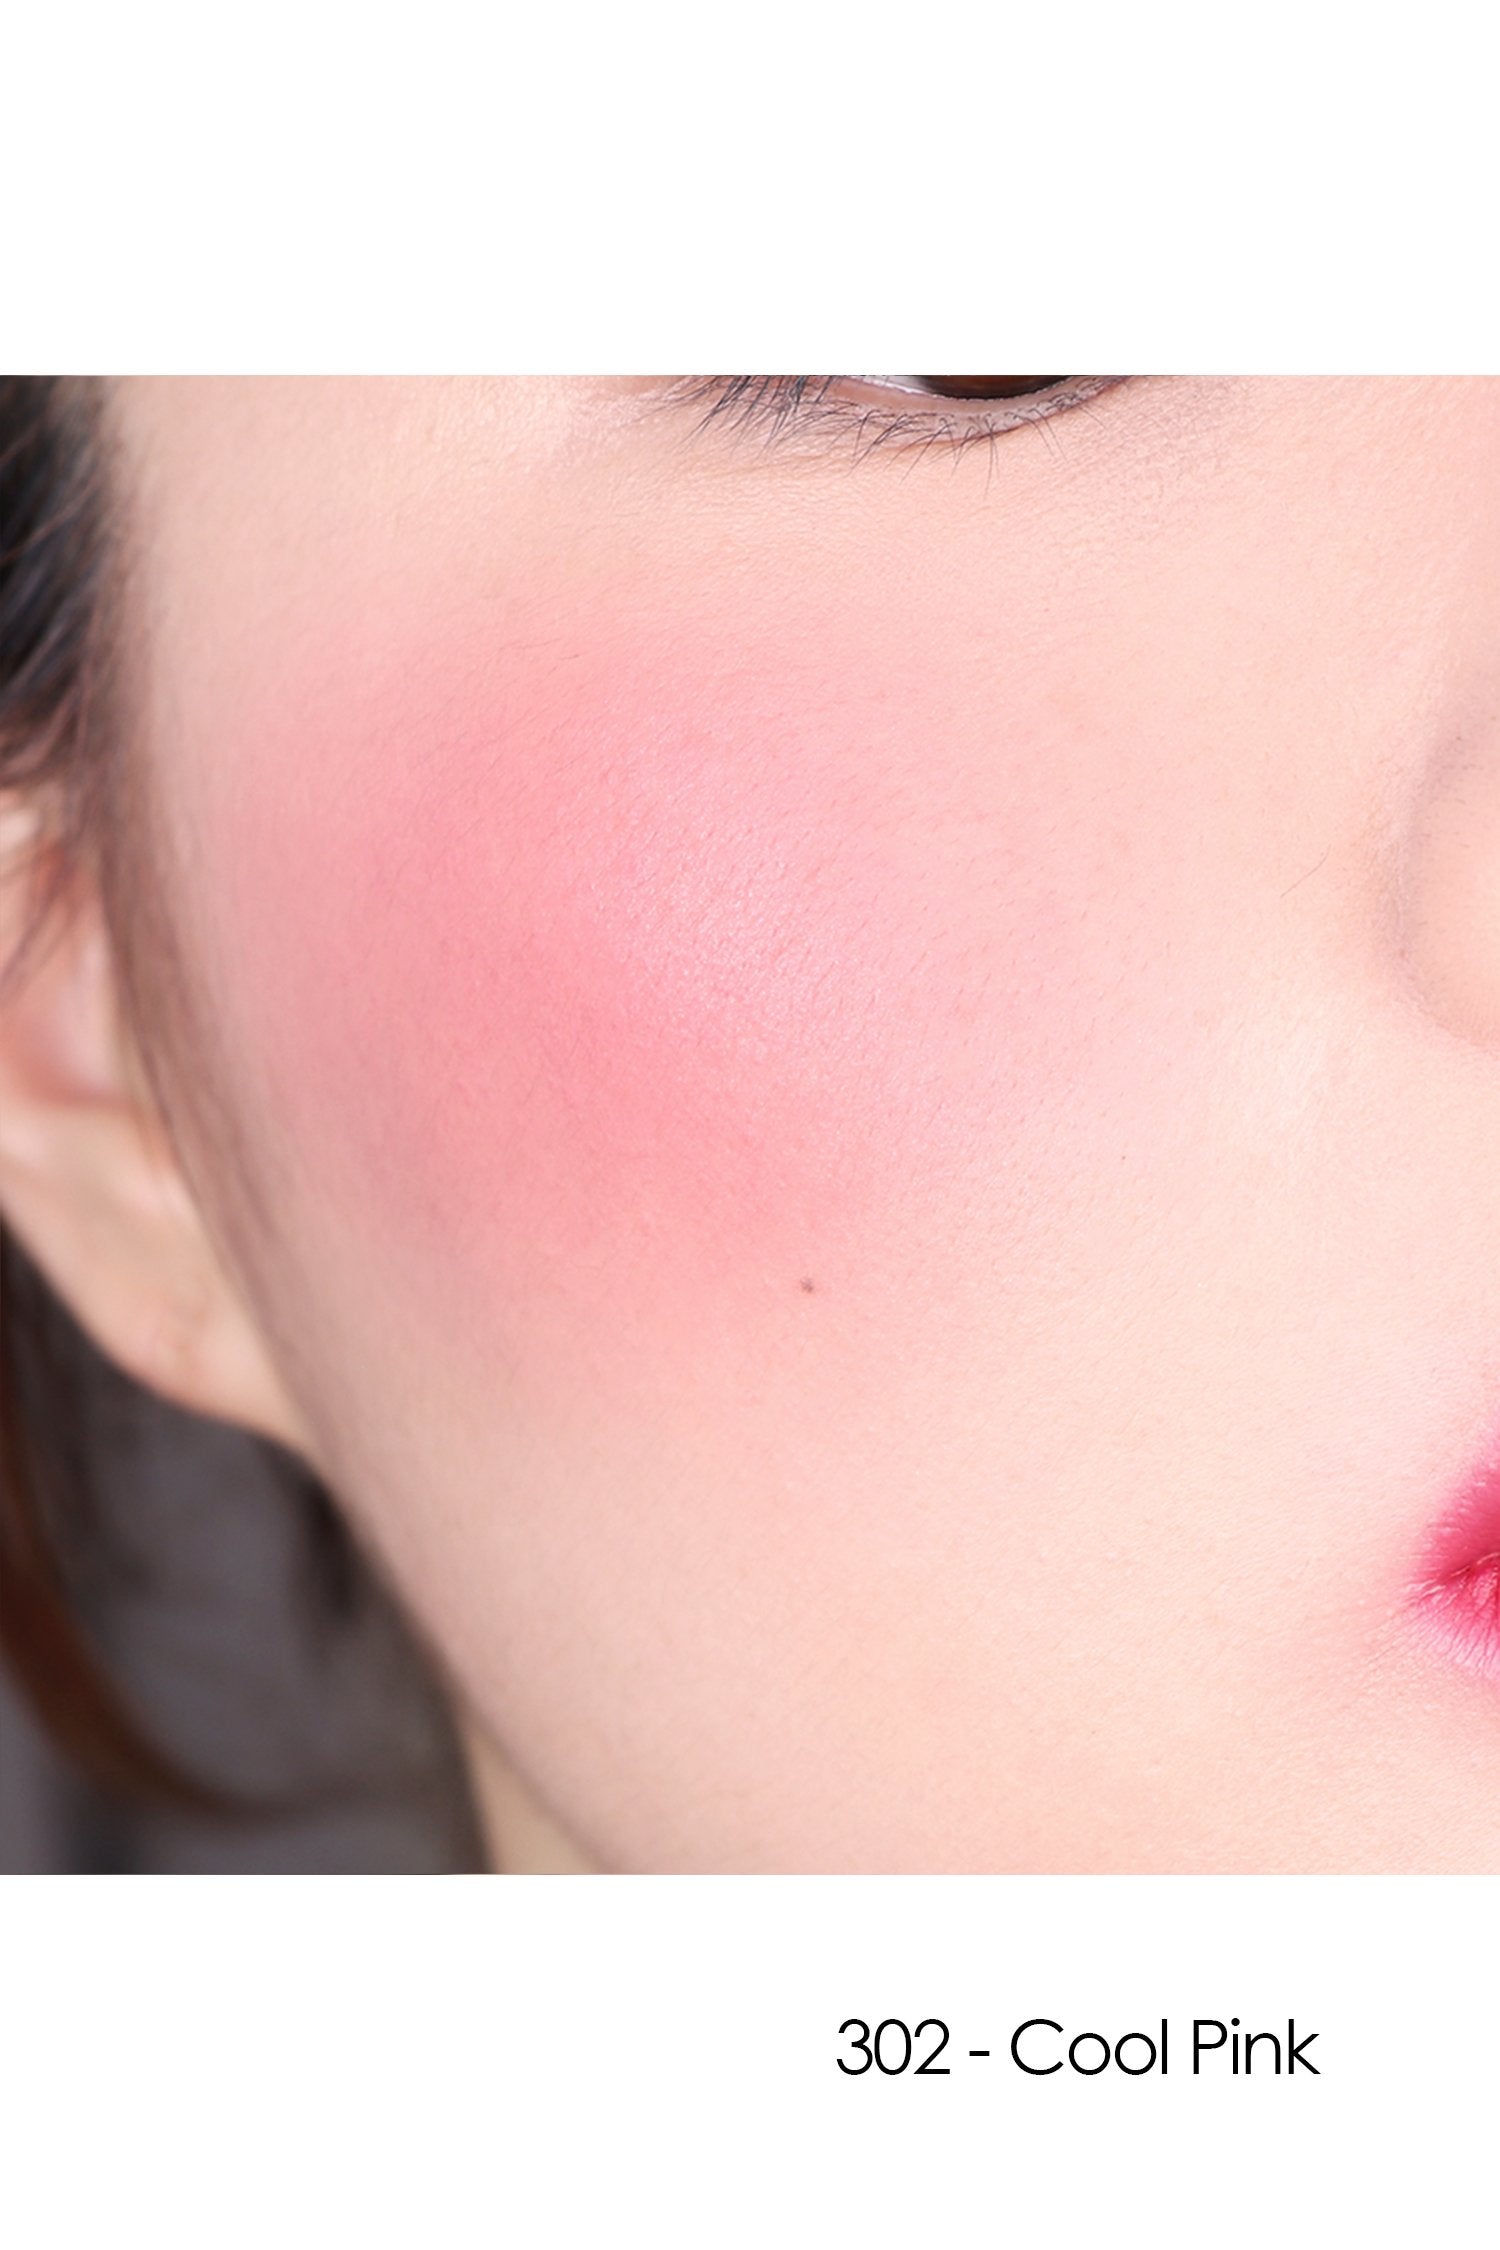 The gorgeous 302 - Cool Pink of this powder spreads on the cheeks and clings tightly on the skin.